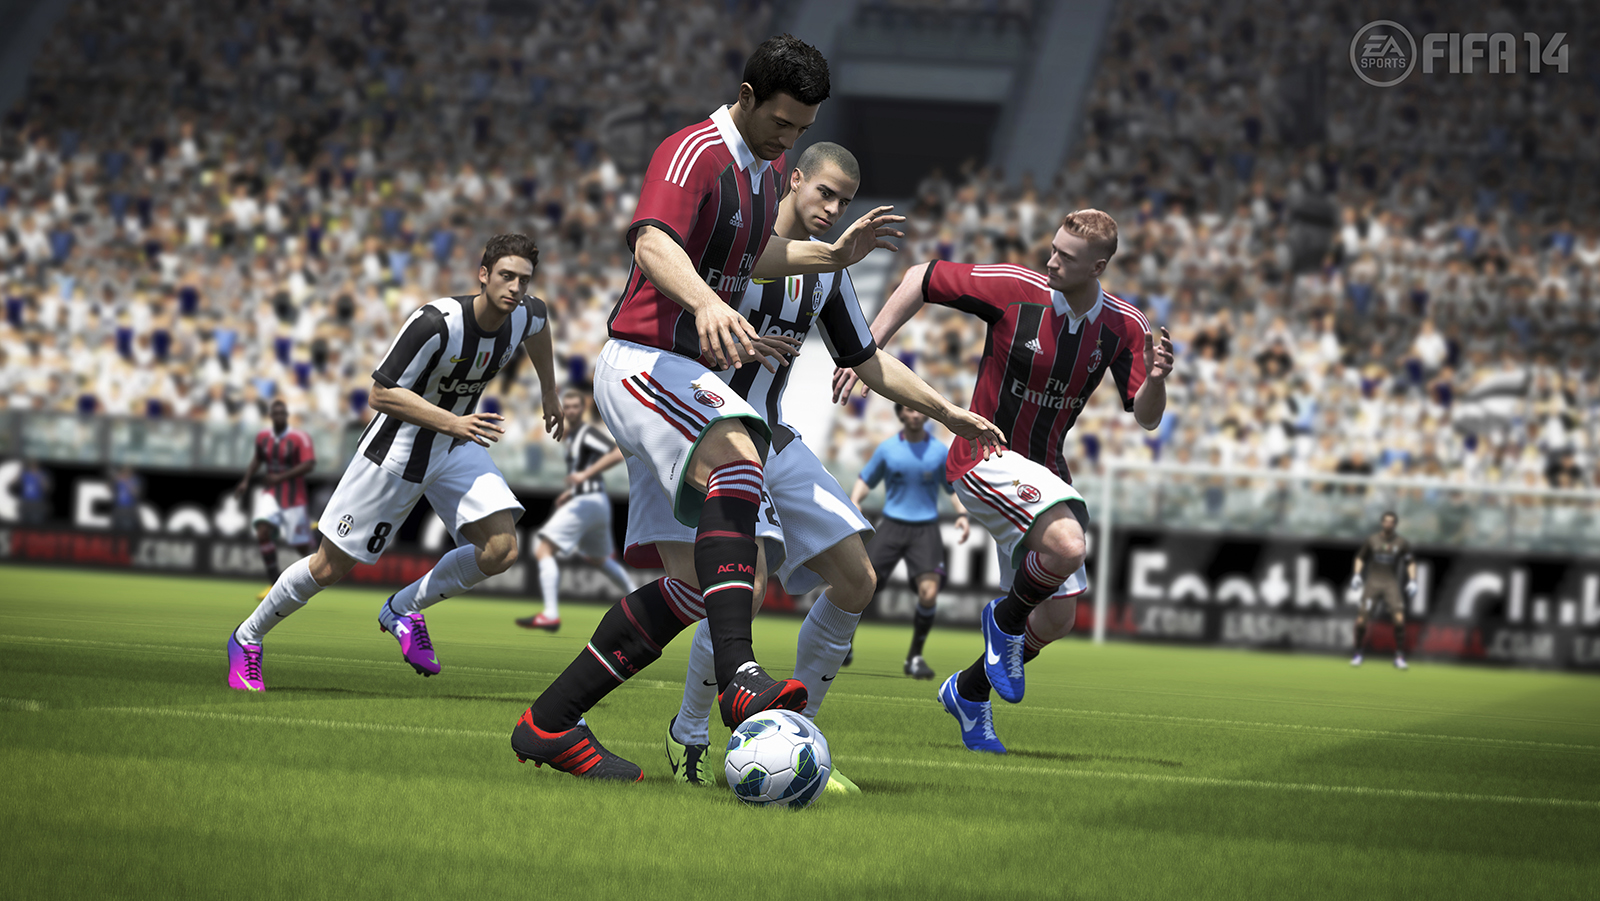 Media asset in full size related to 3dfxzone.it news item entitled as follows: EA Sports annuncia FIFA 14 e mostra i primi screenshots in-game | Image Name: news19364_FIFA-14-screenshot_3.jpg